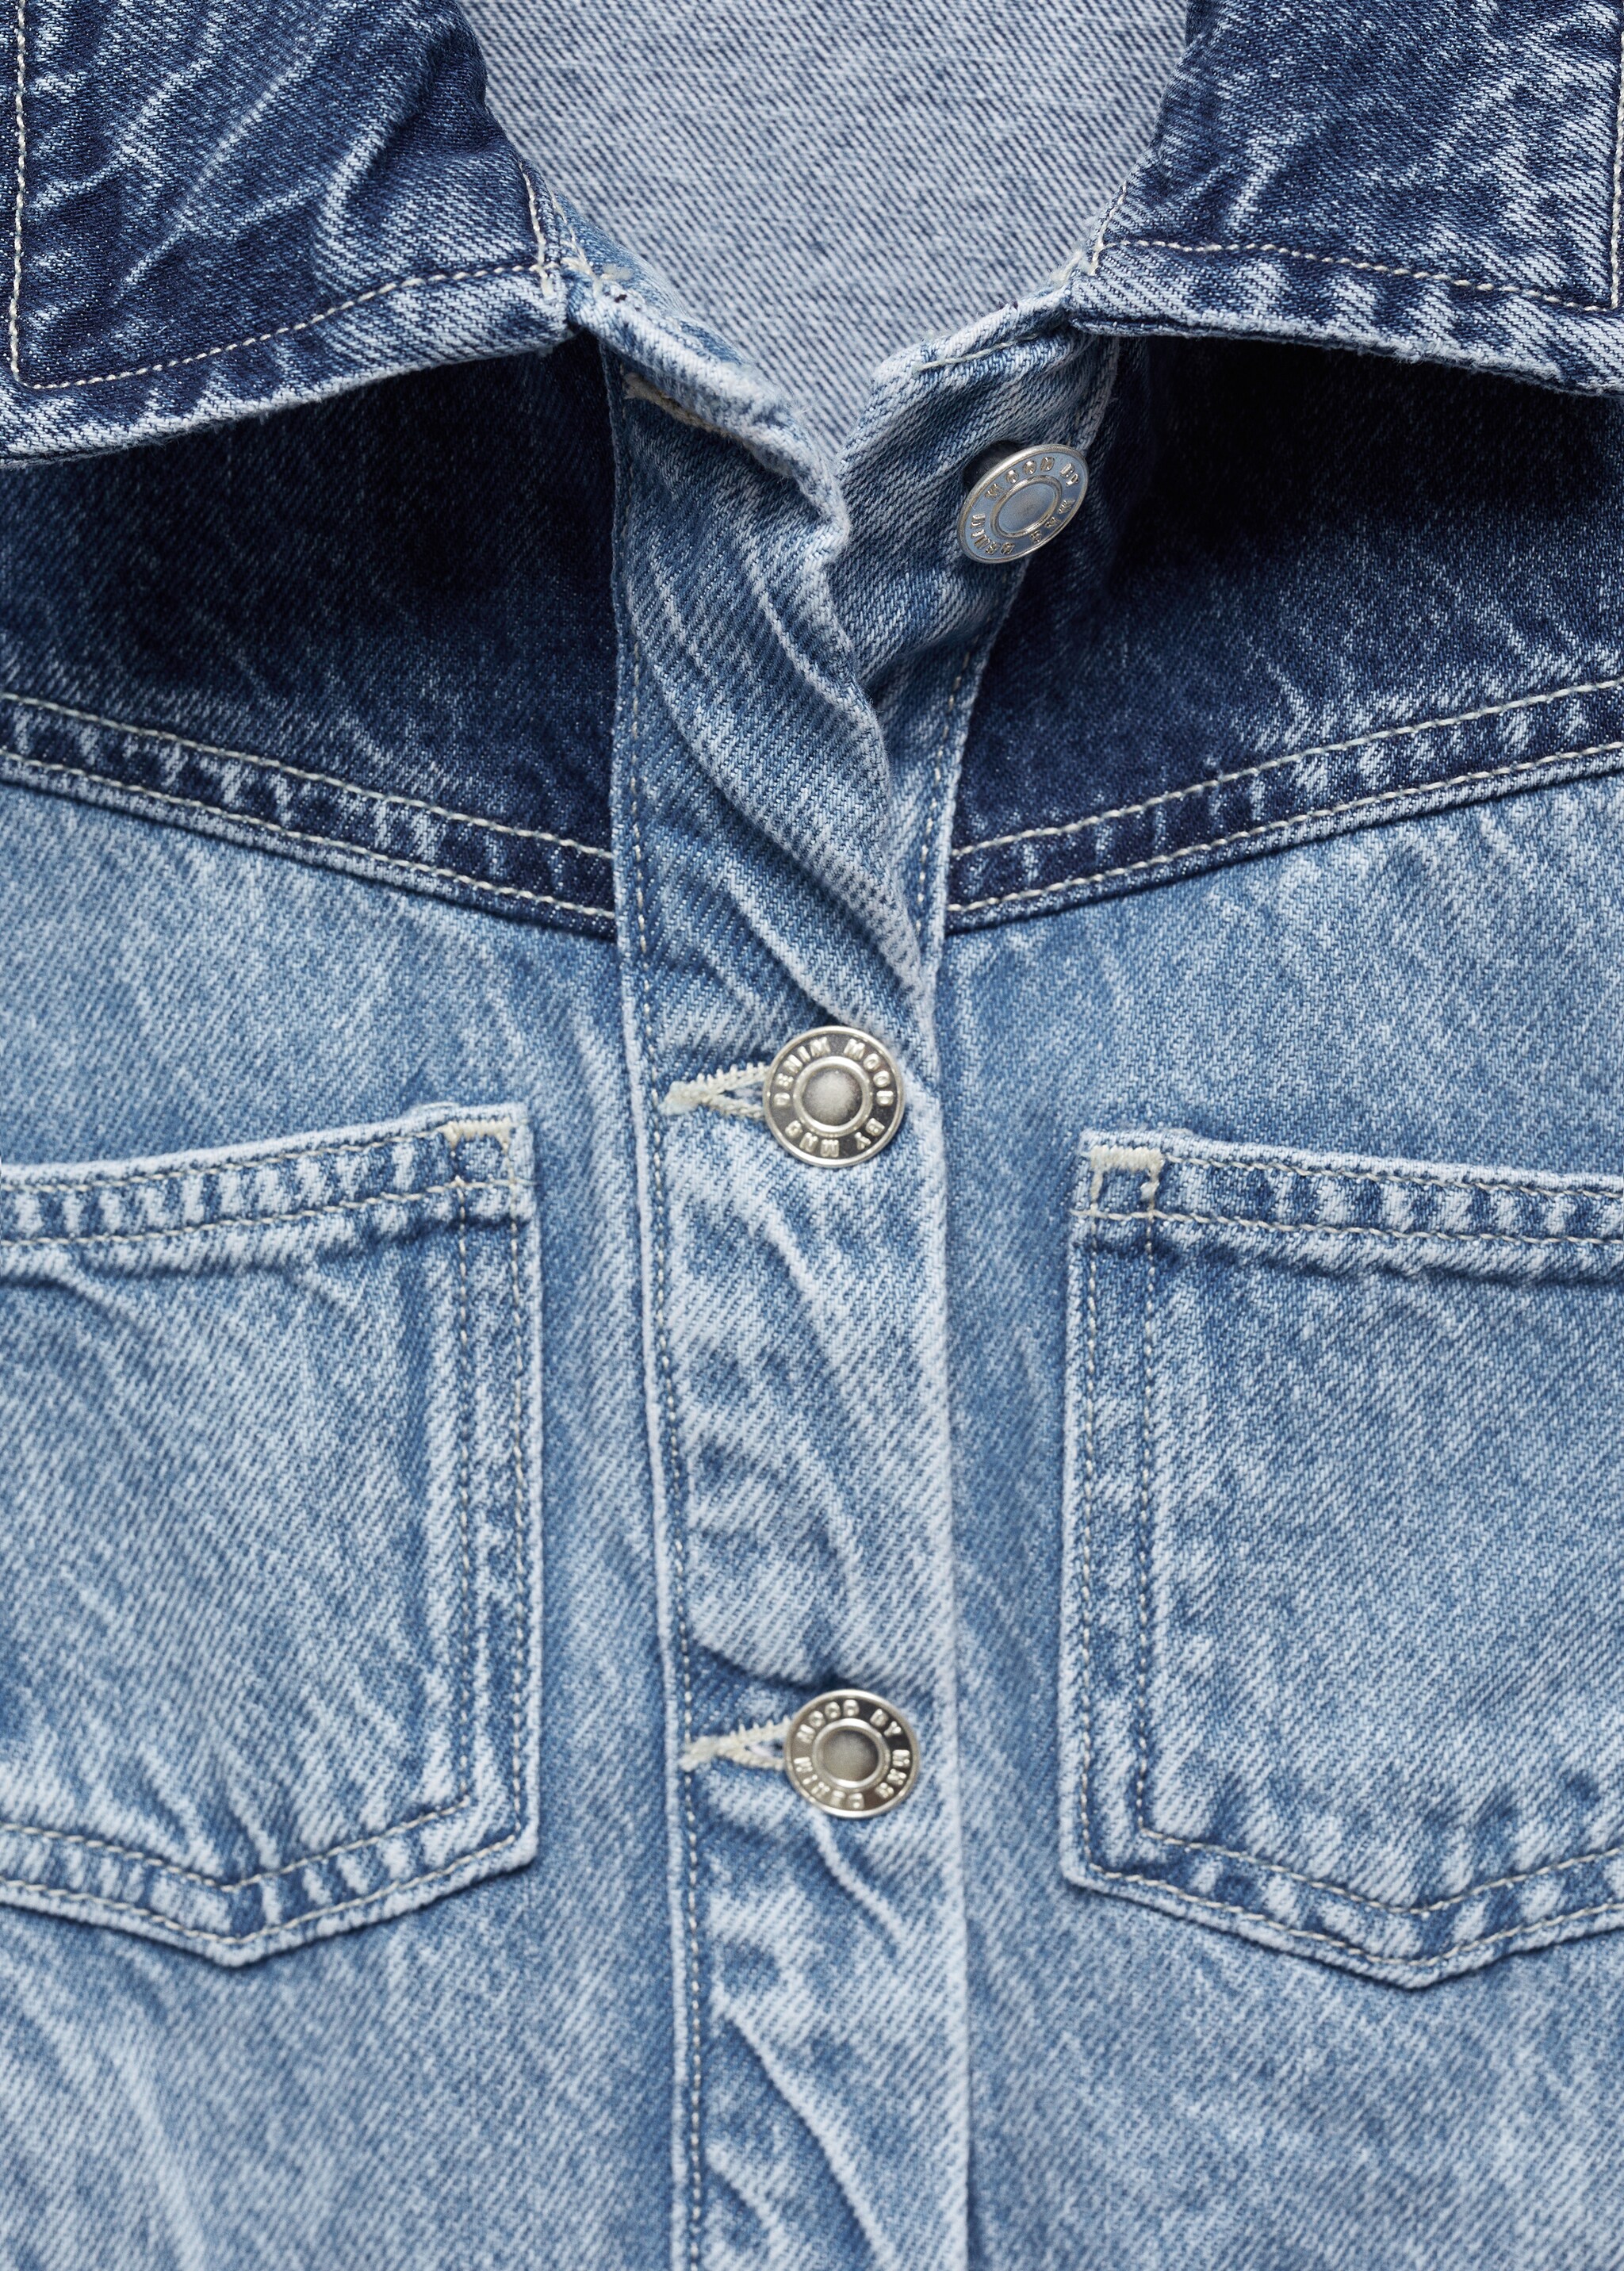 Two-tone denim jacket - Details of the article 8